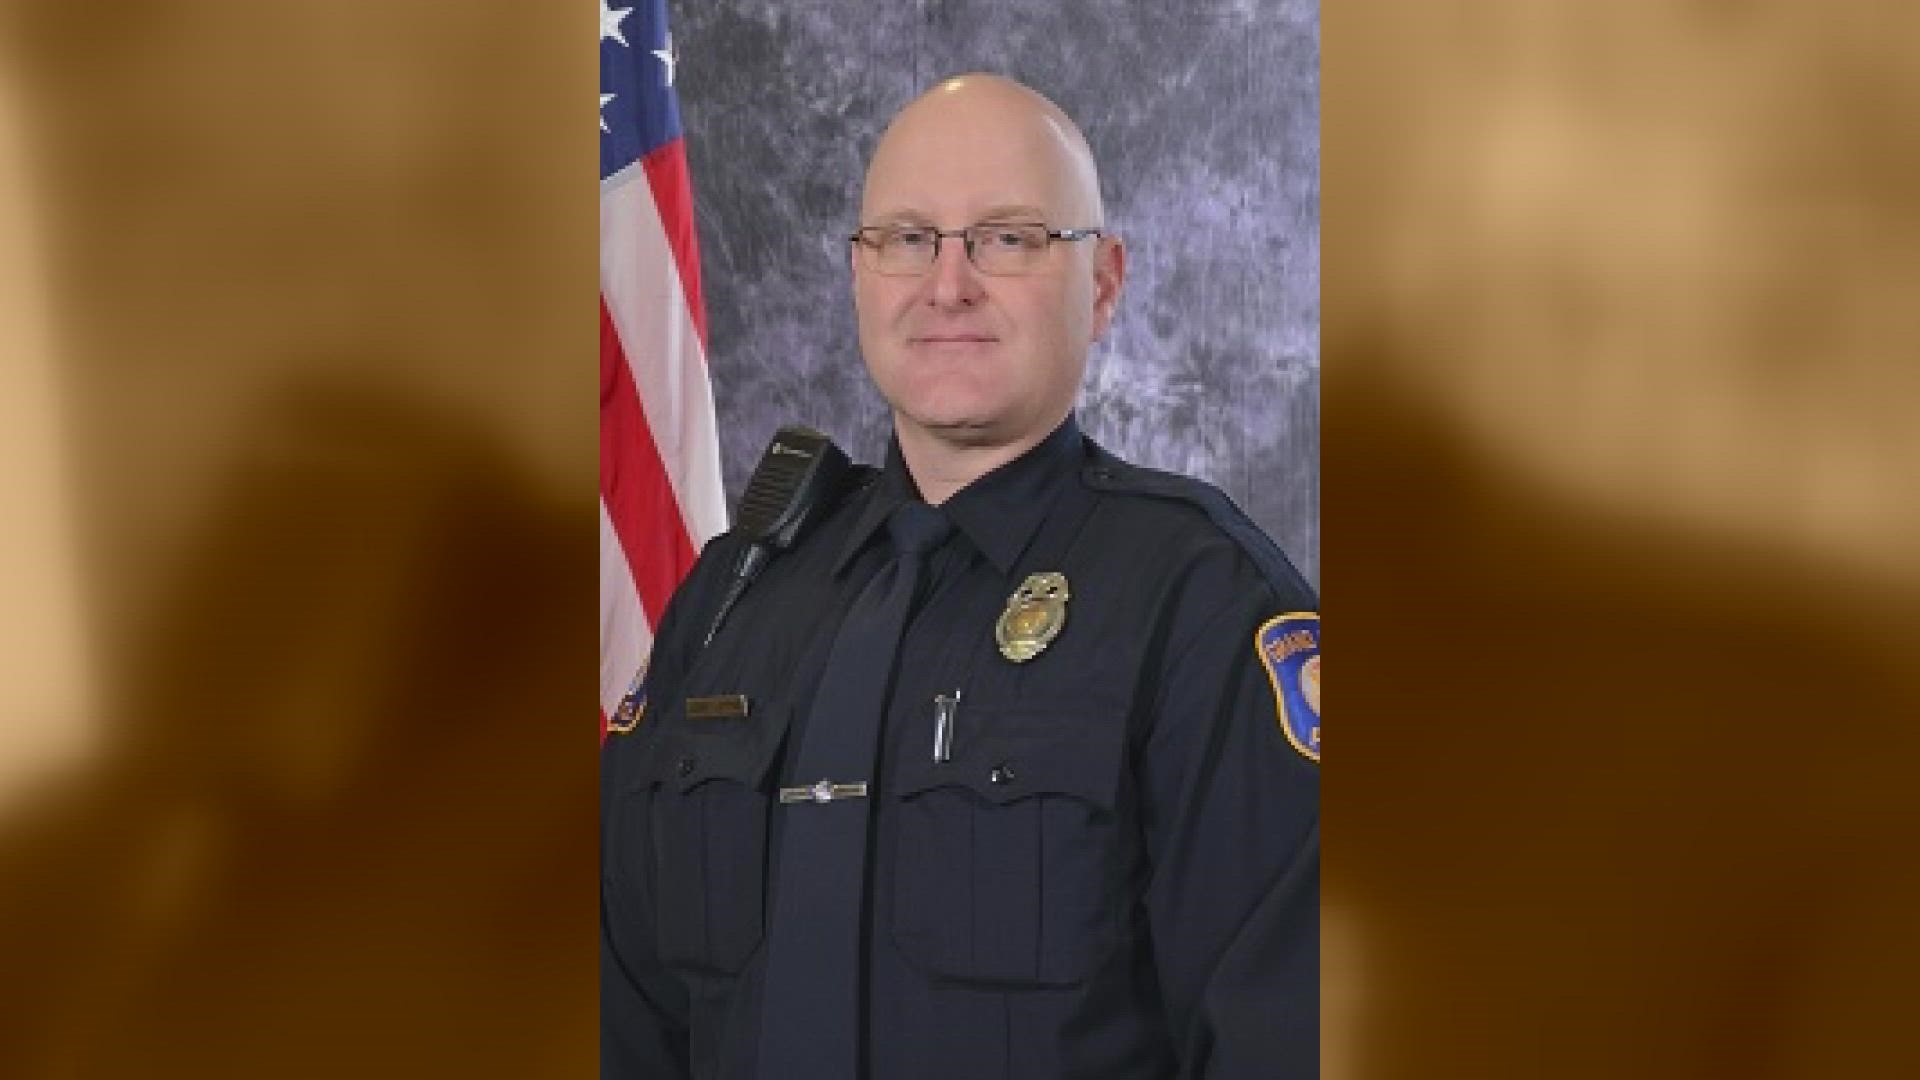 A Grand Rapids Police Officer is up for a national award.